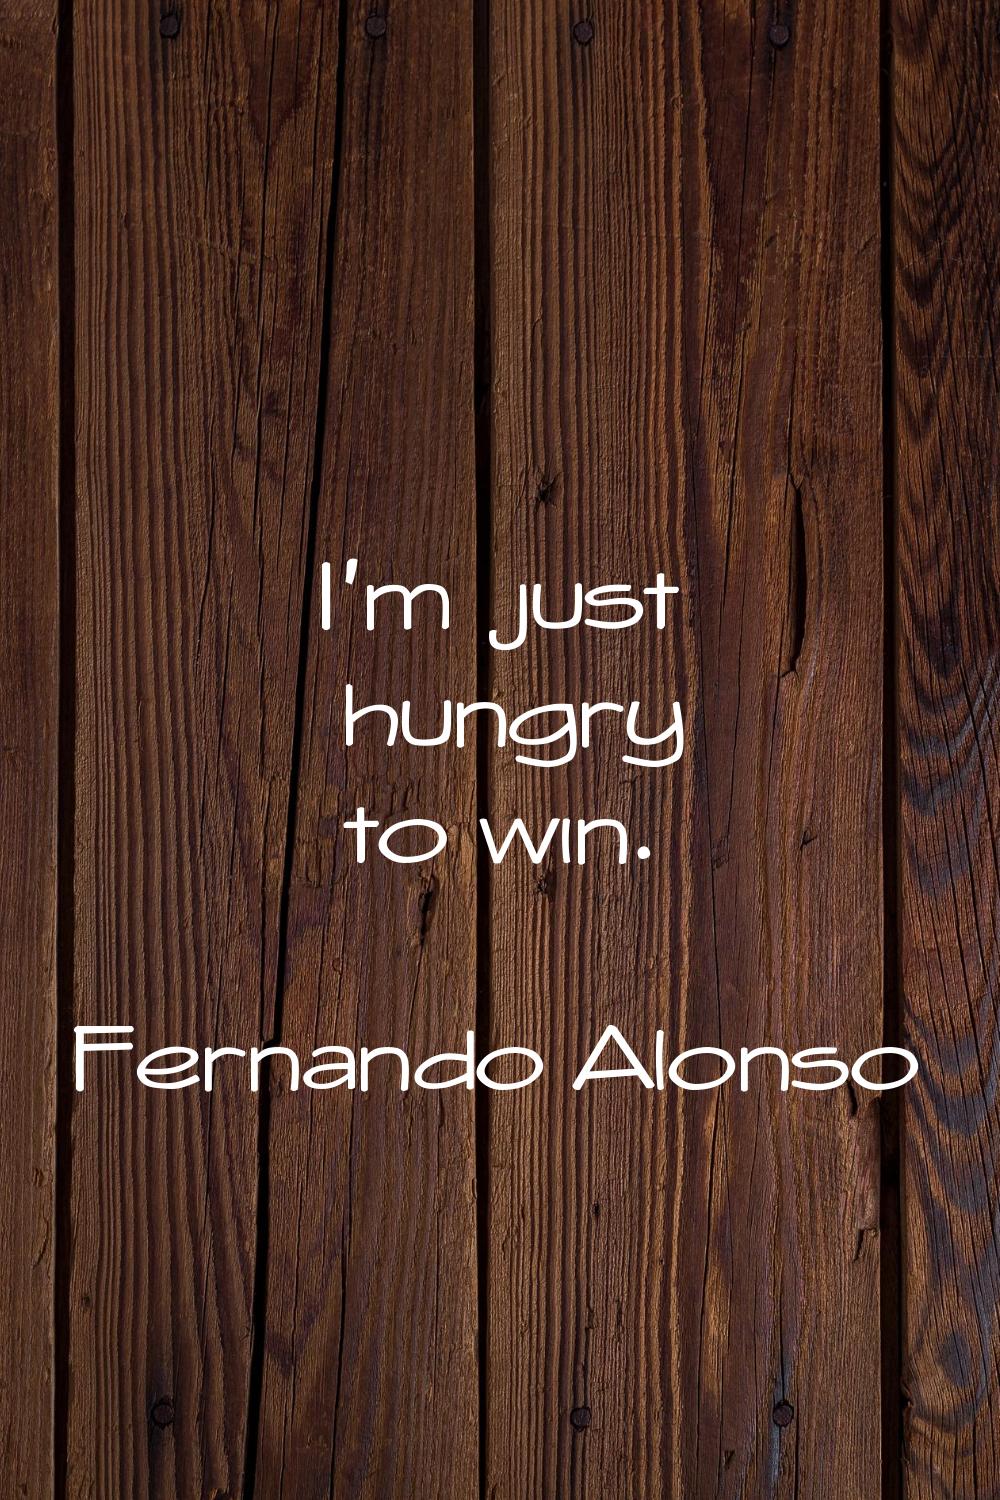 I'm just hungry to win.